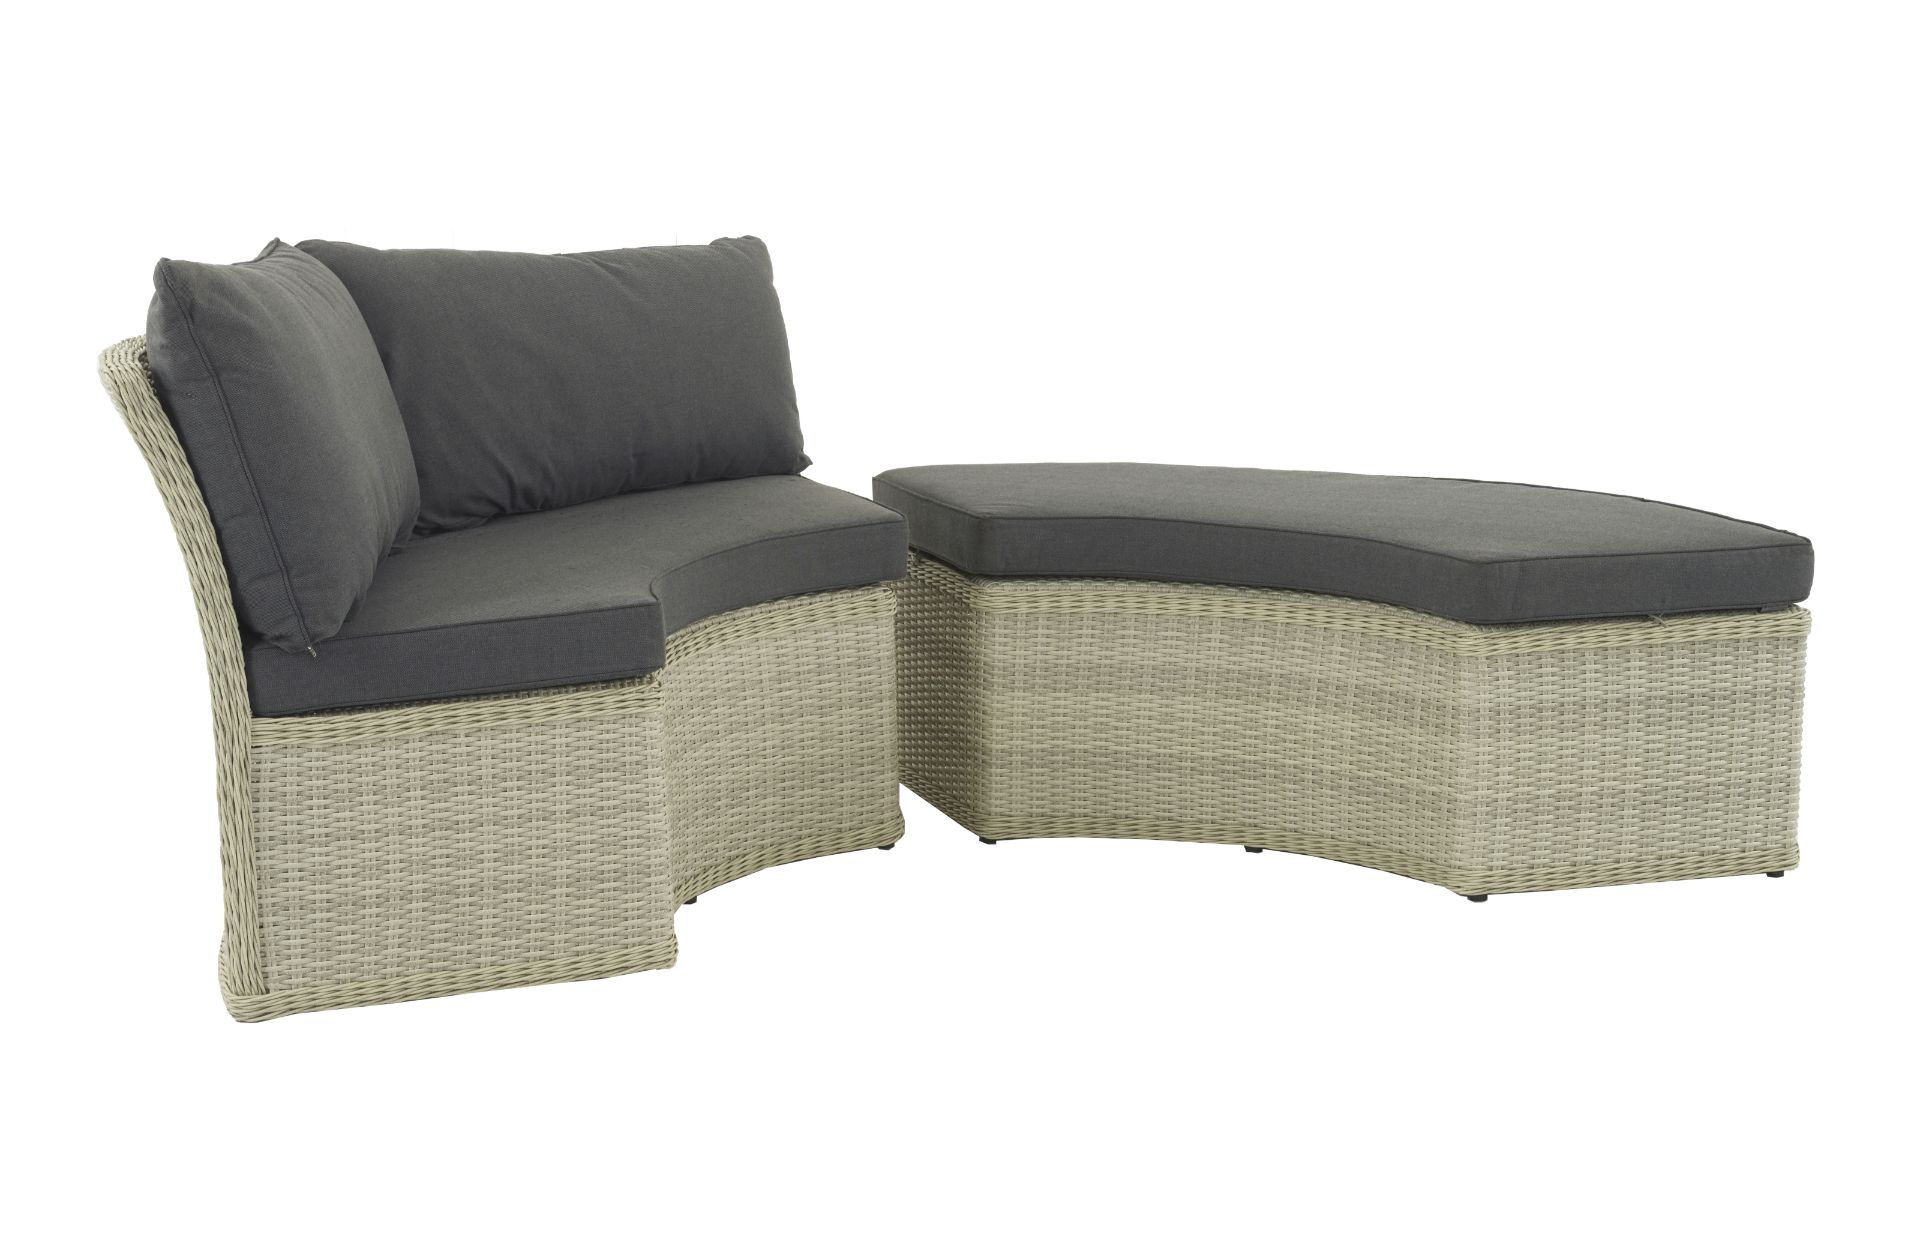 Set A506 Monterey Curved Sofa & Bench - Right (Dove Grey)